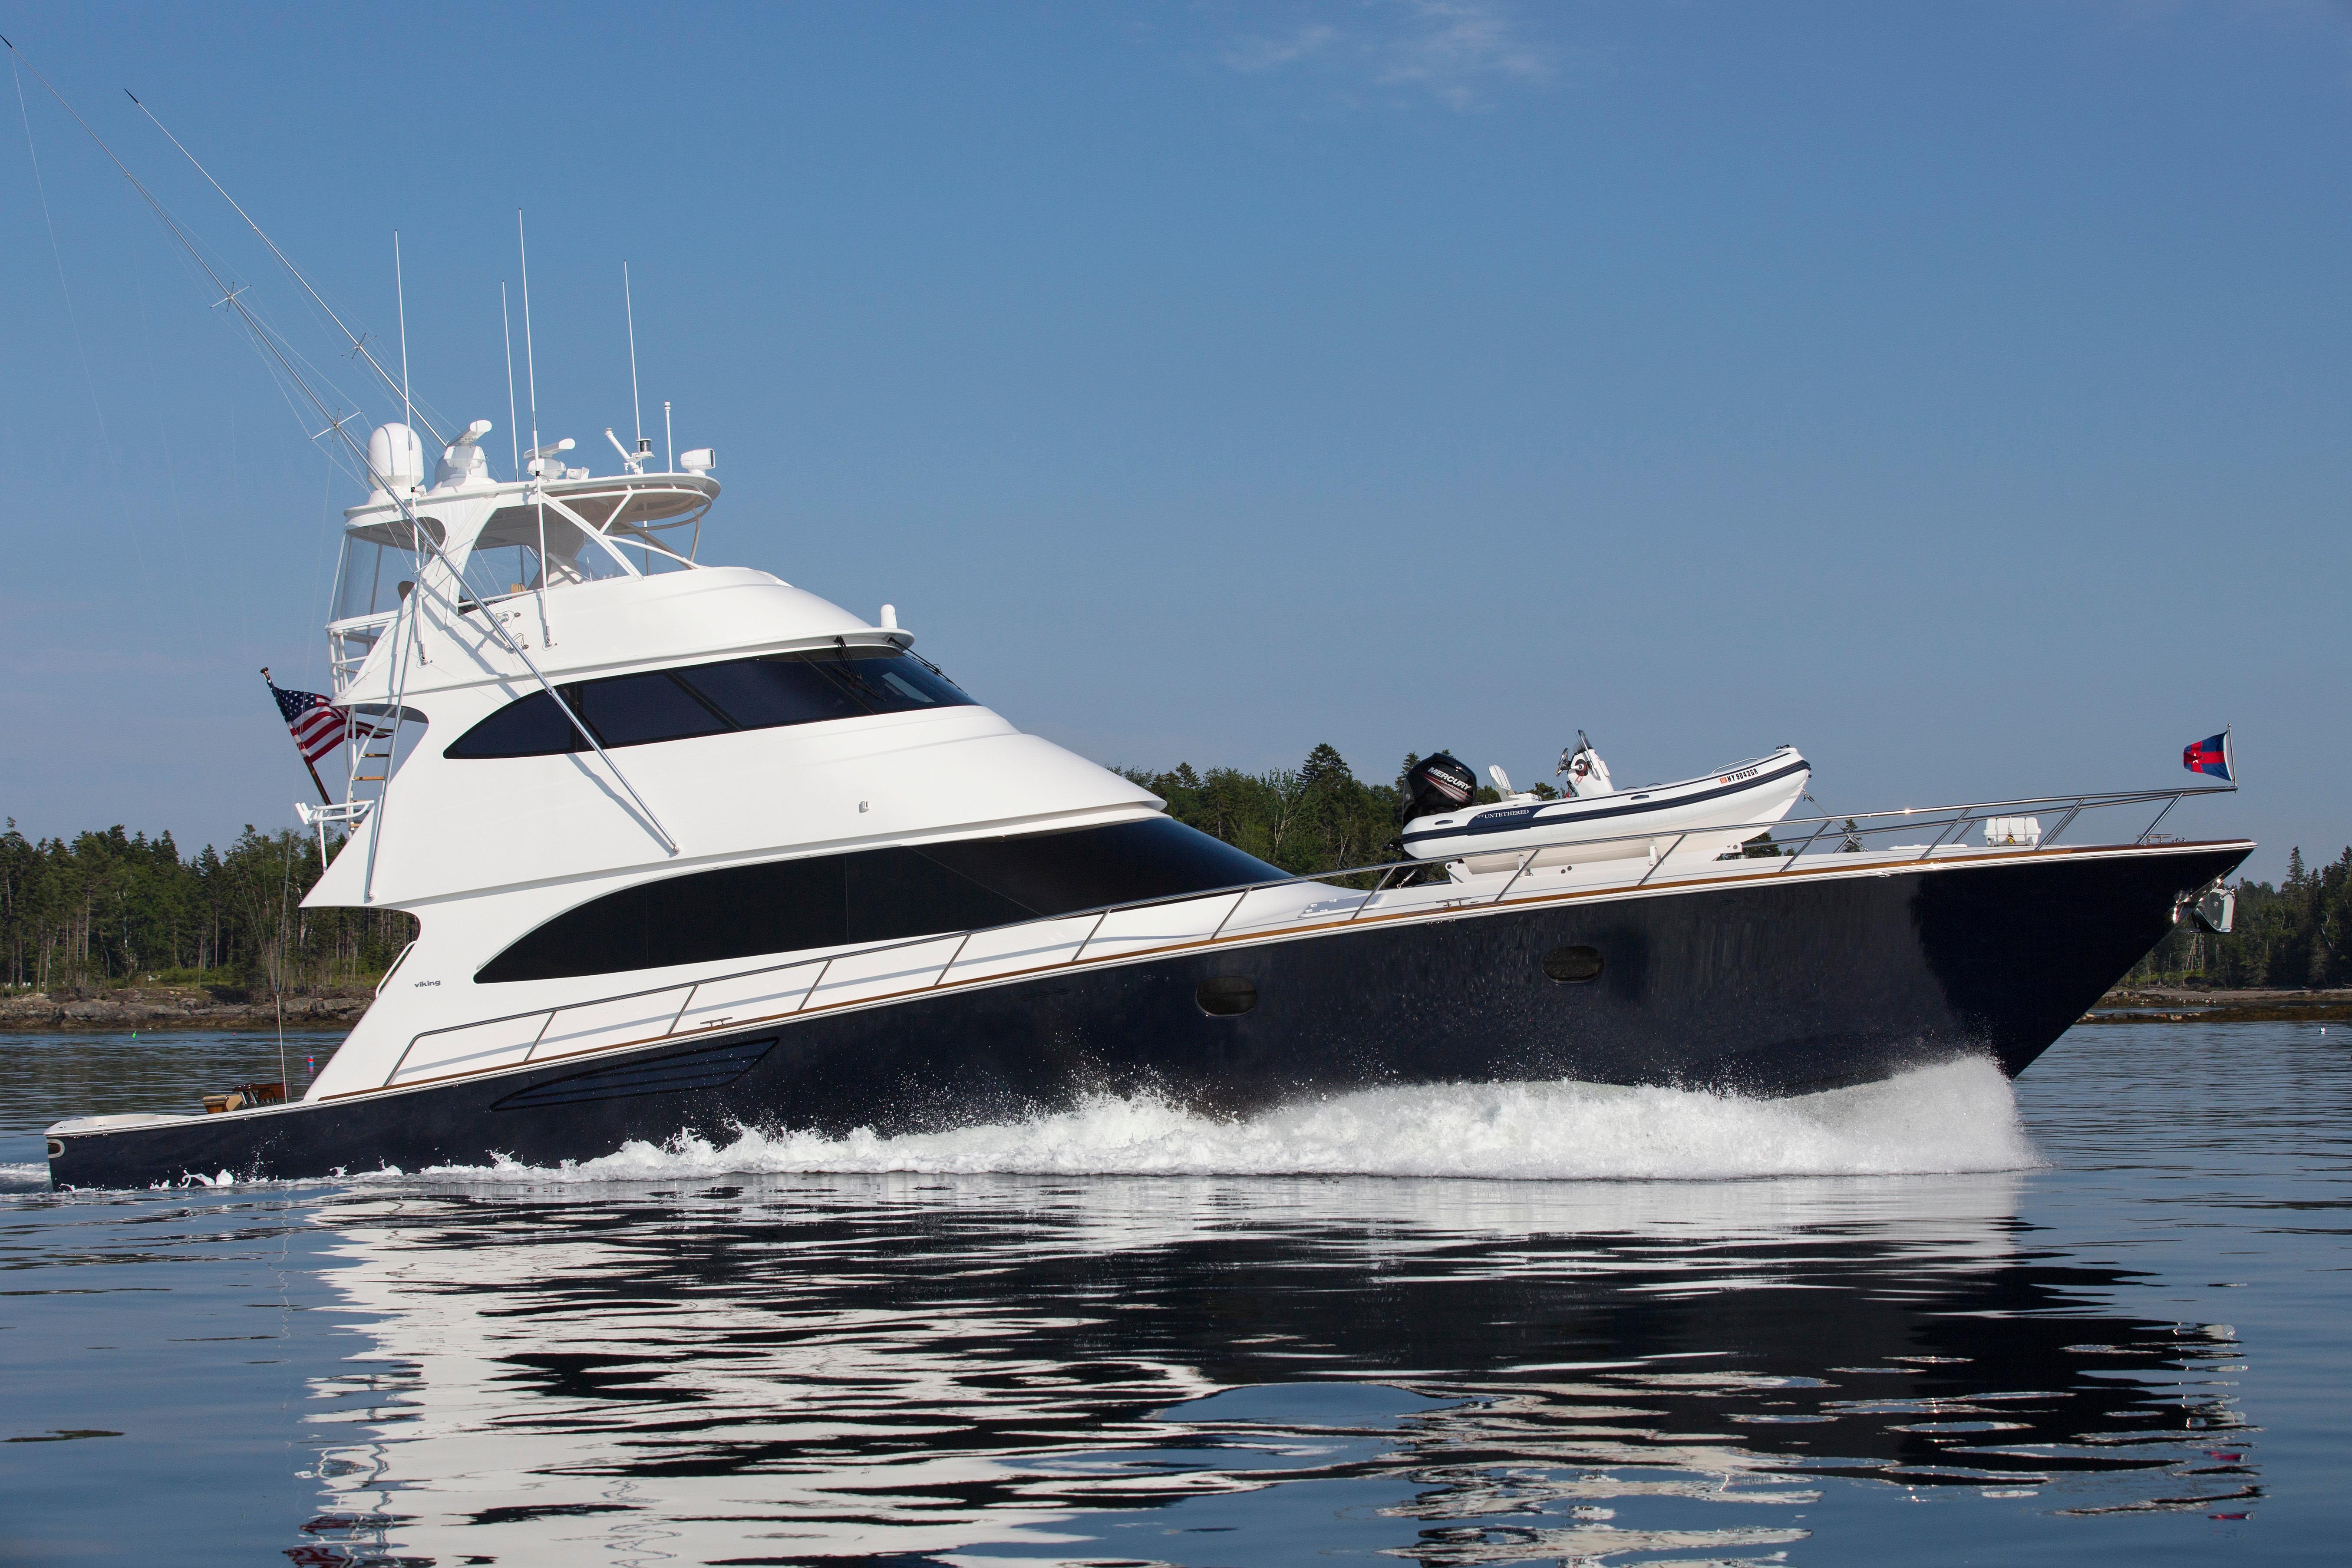 82 Viking Yacht 2016 "Untethered" For Sale in , US | Denison Yacht Sales